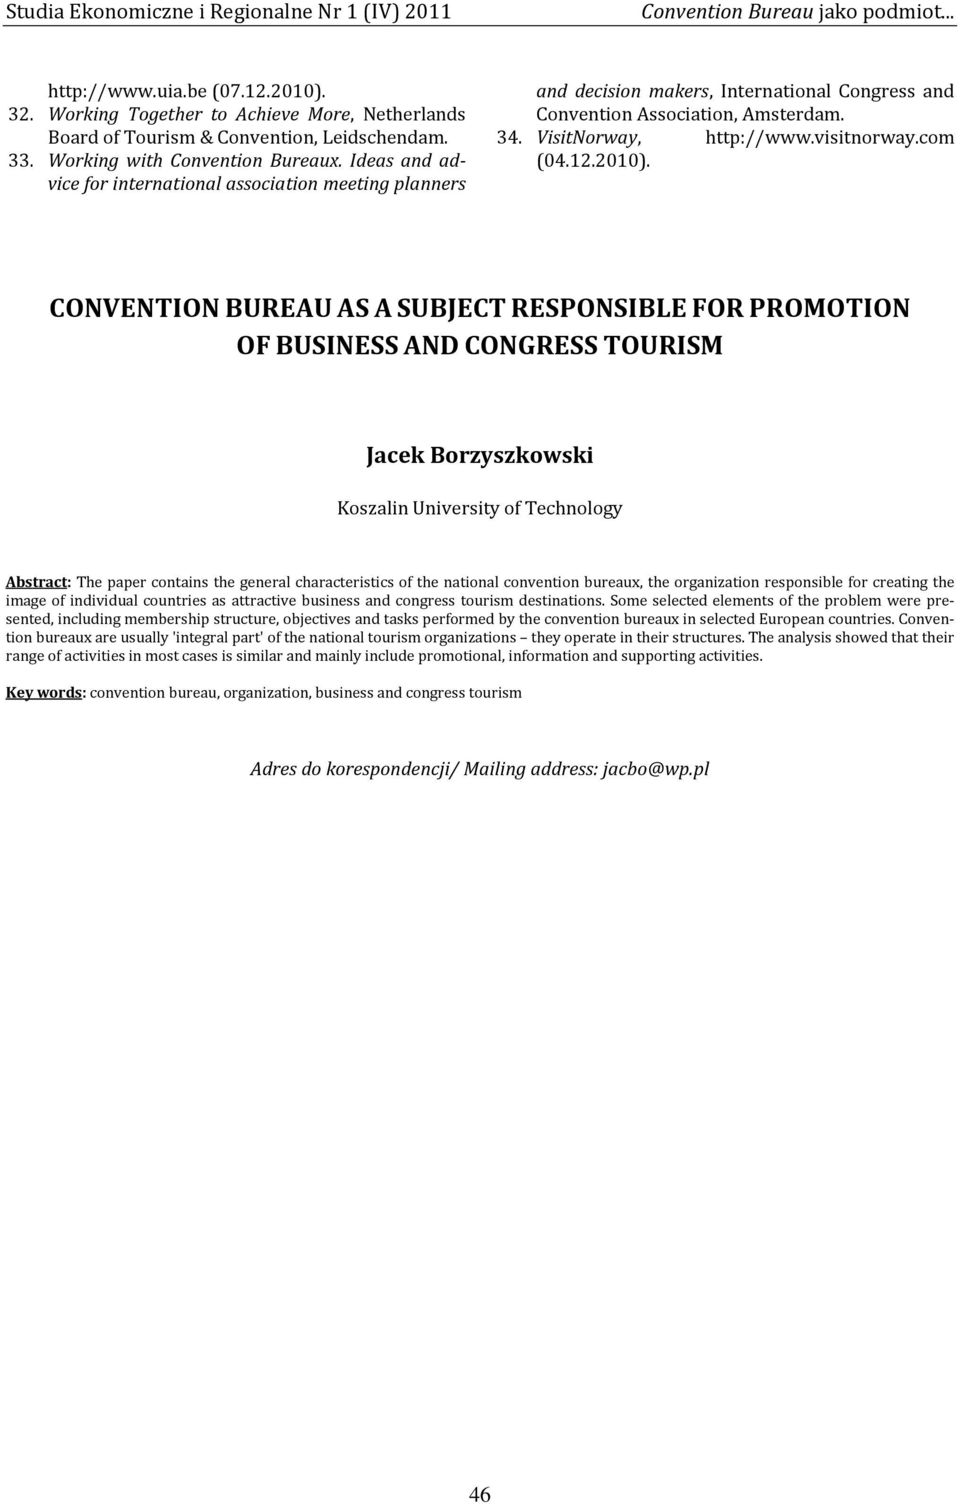 com CONVENTION BUREAU AS A SUBJECT RESPONSIBLE FOR PROMOTION OF BUSINESS AND CONGRESS TOURISM Jacek Borzyszkowski Koszalin University of Technology Abstract: The paper contains the general